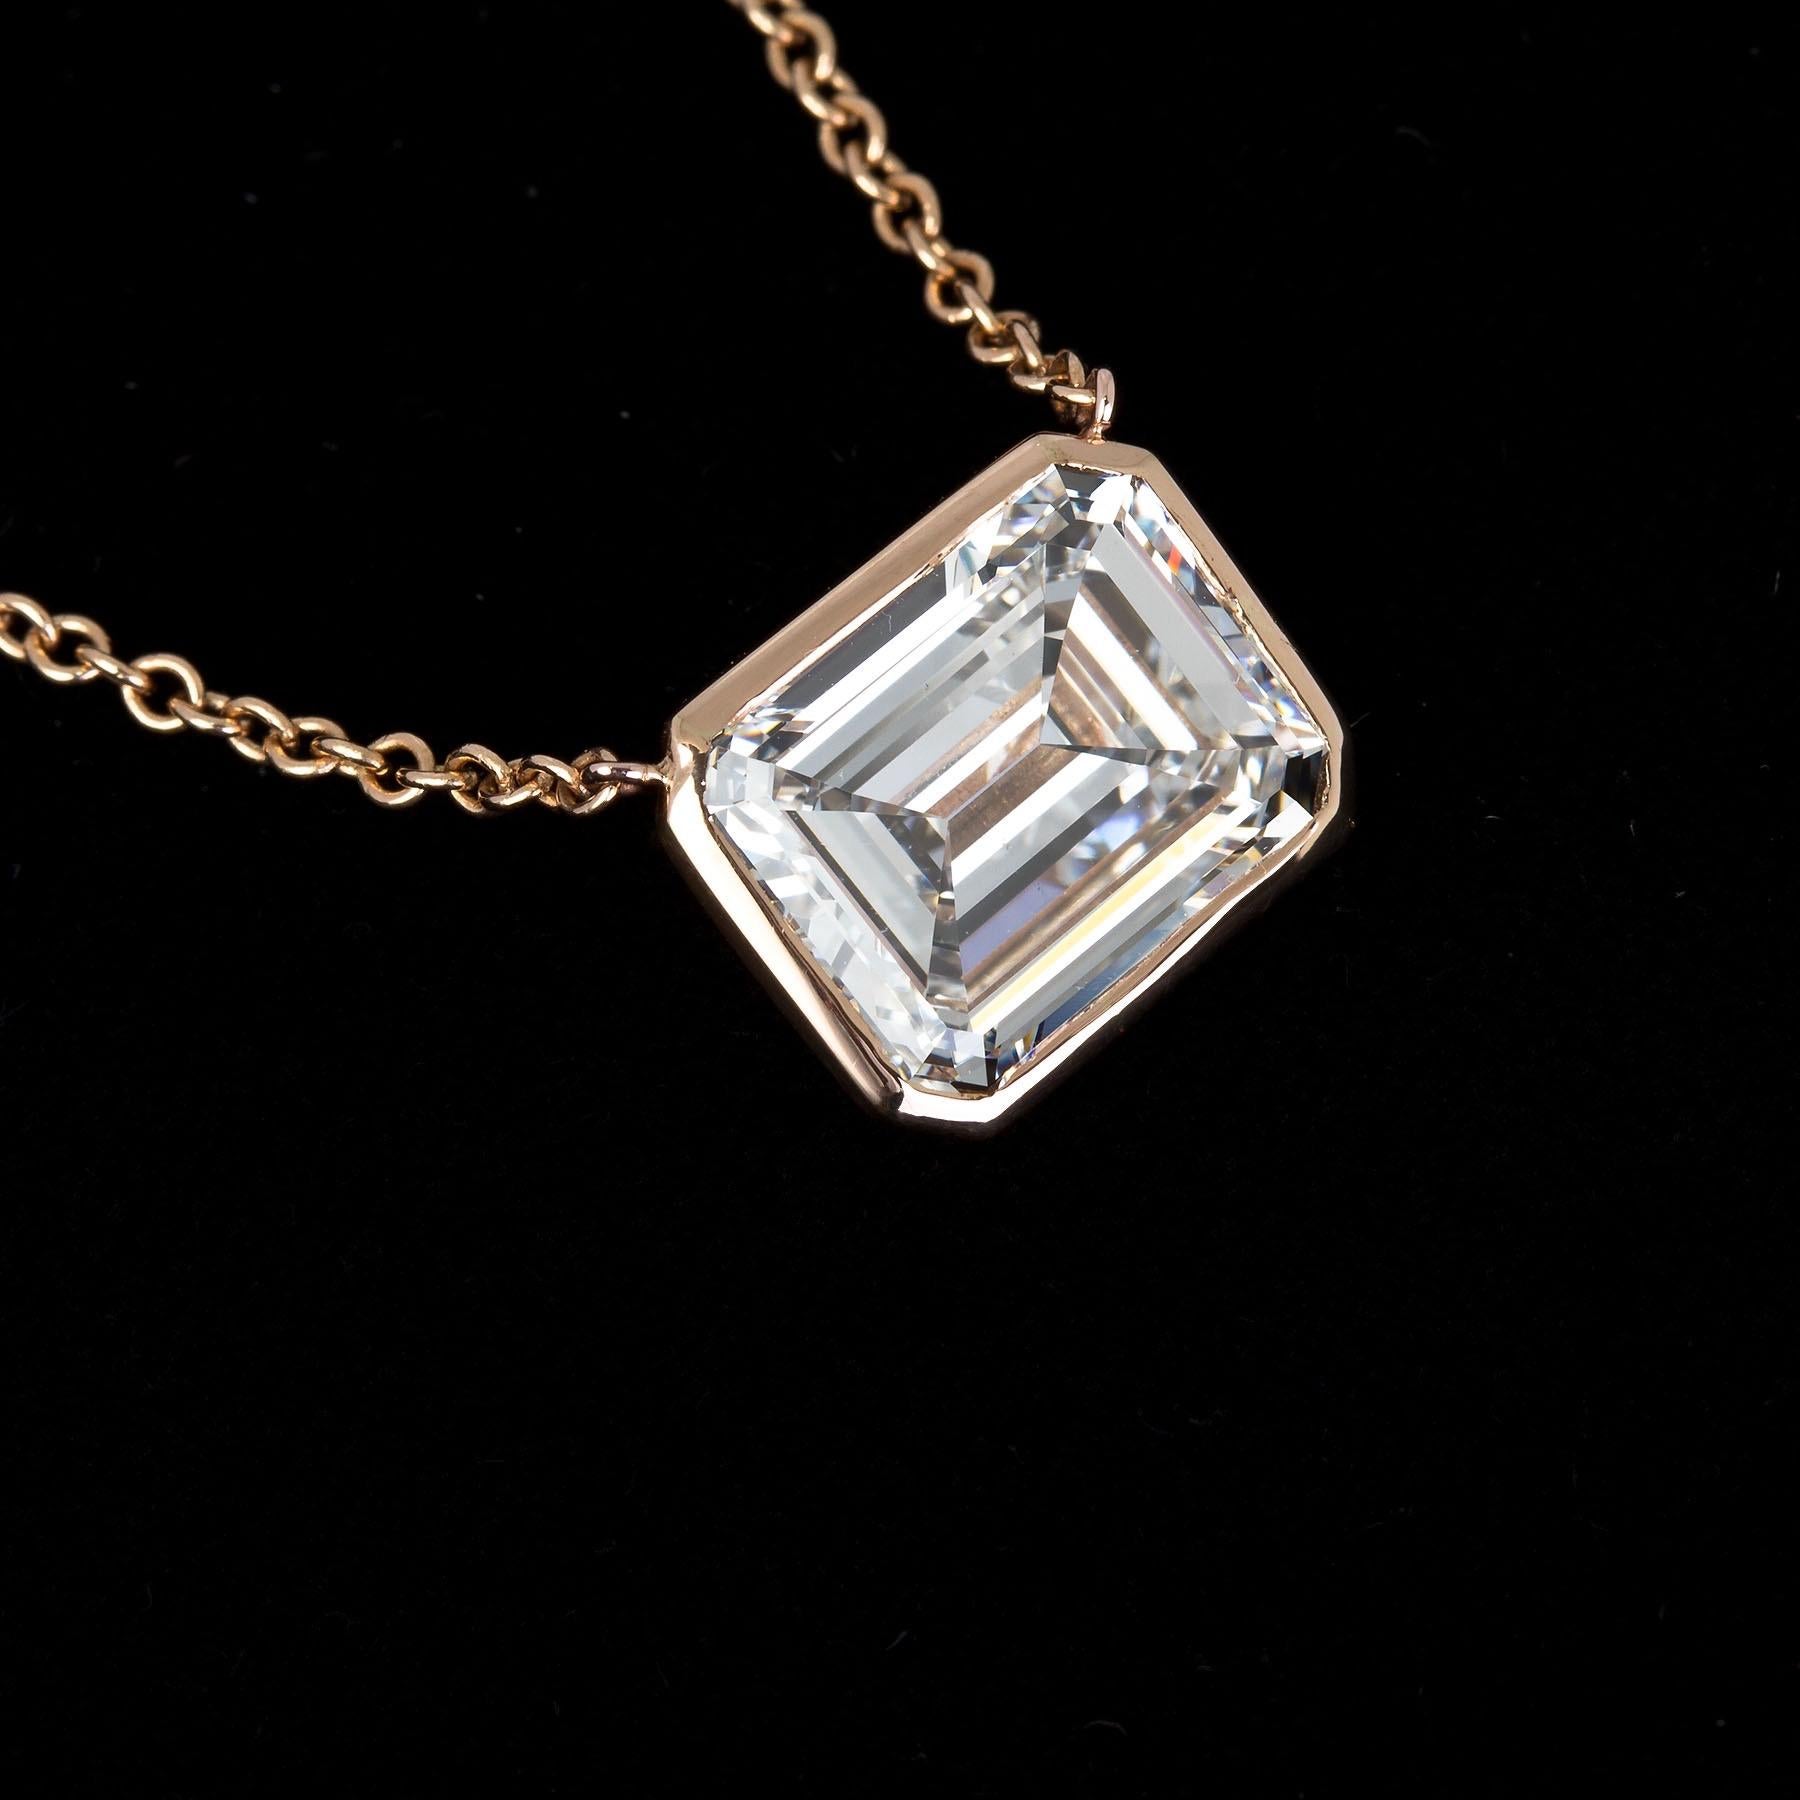 This stunning pendant necklace set in Italian hand made rose gold setting featuring a beuitiful emereald cut diamond, weighing 5.53 carats. H color VS2 clarity.
This GIA Certified 5.53 carat emerald cut diamond is as full of life and luster as a